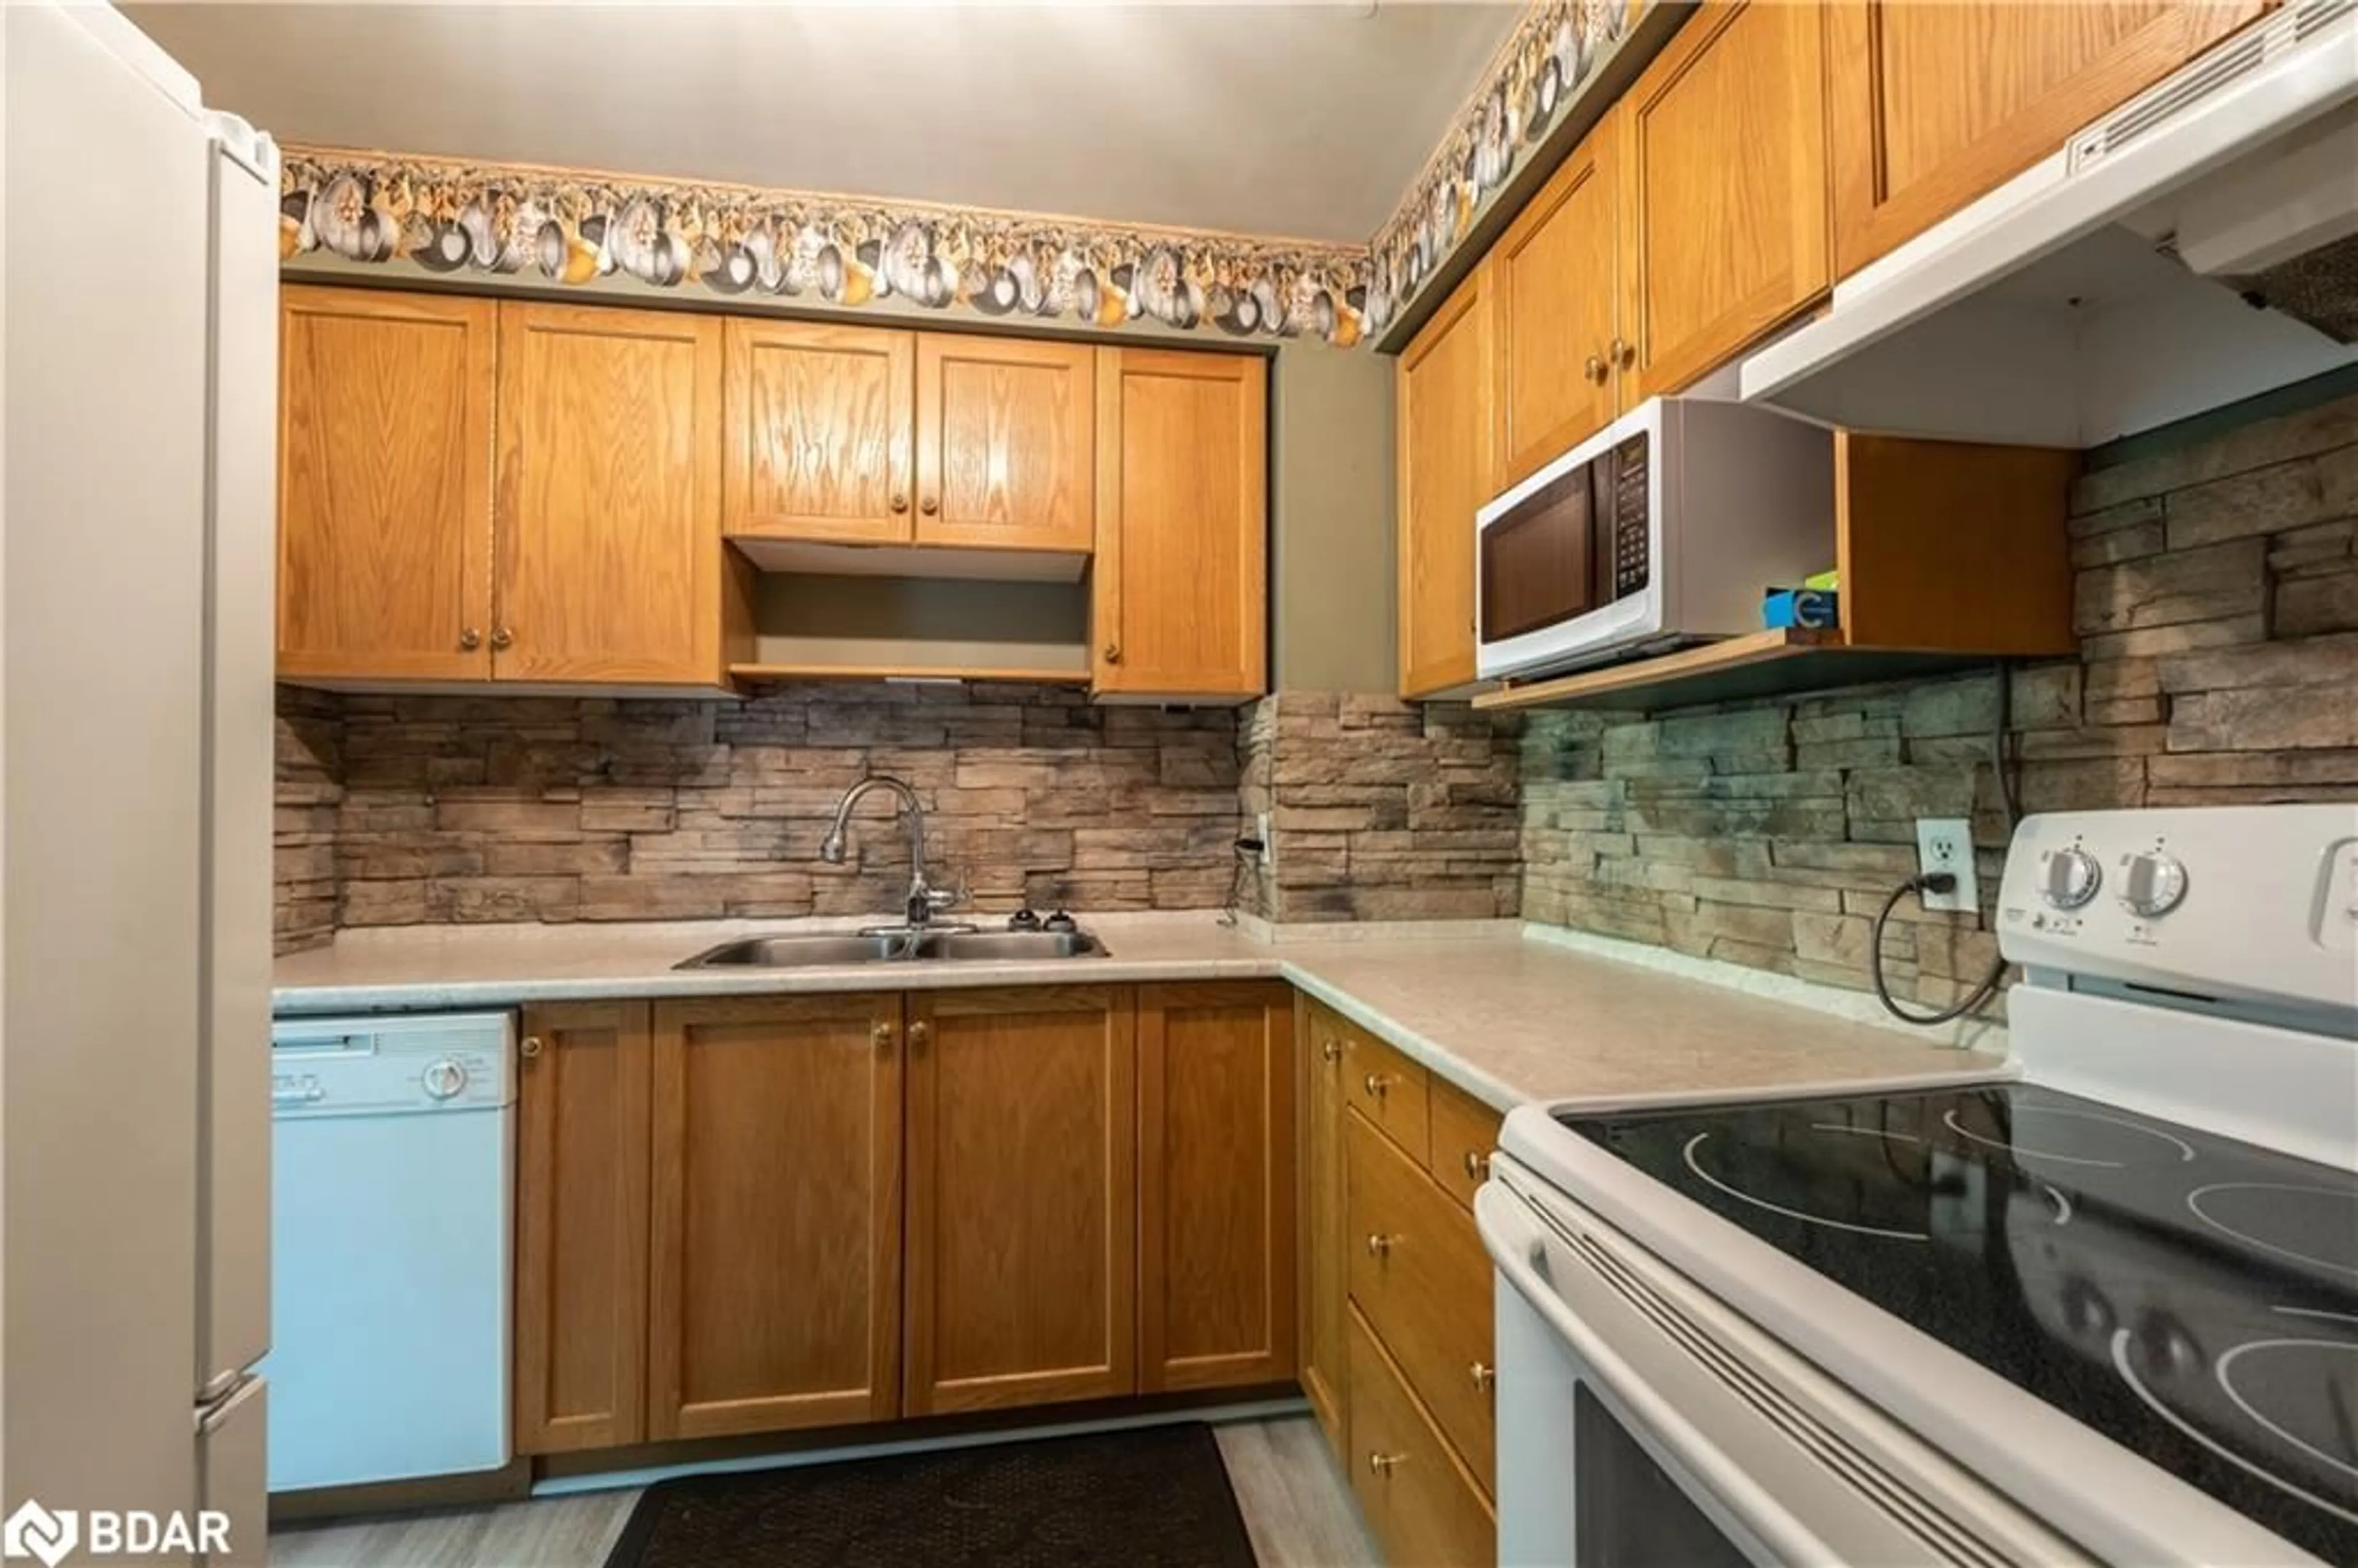 Standard kitchen for 286 Cushman Road Rd #15, St. Catharines Ontario L2M 7X7